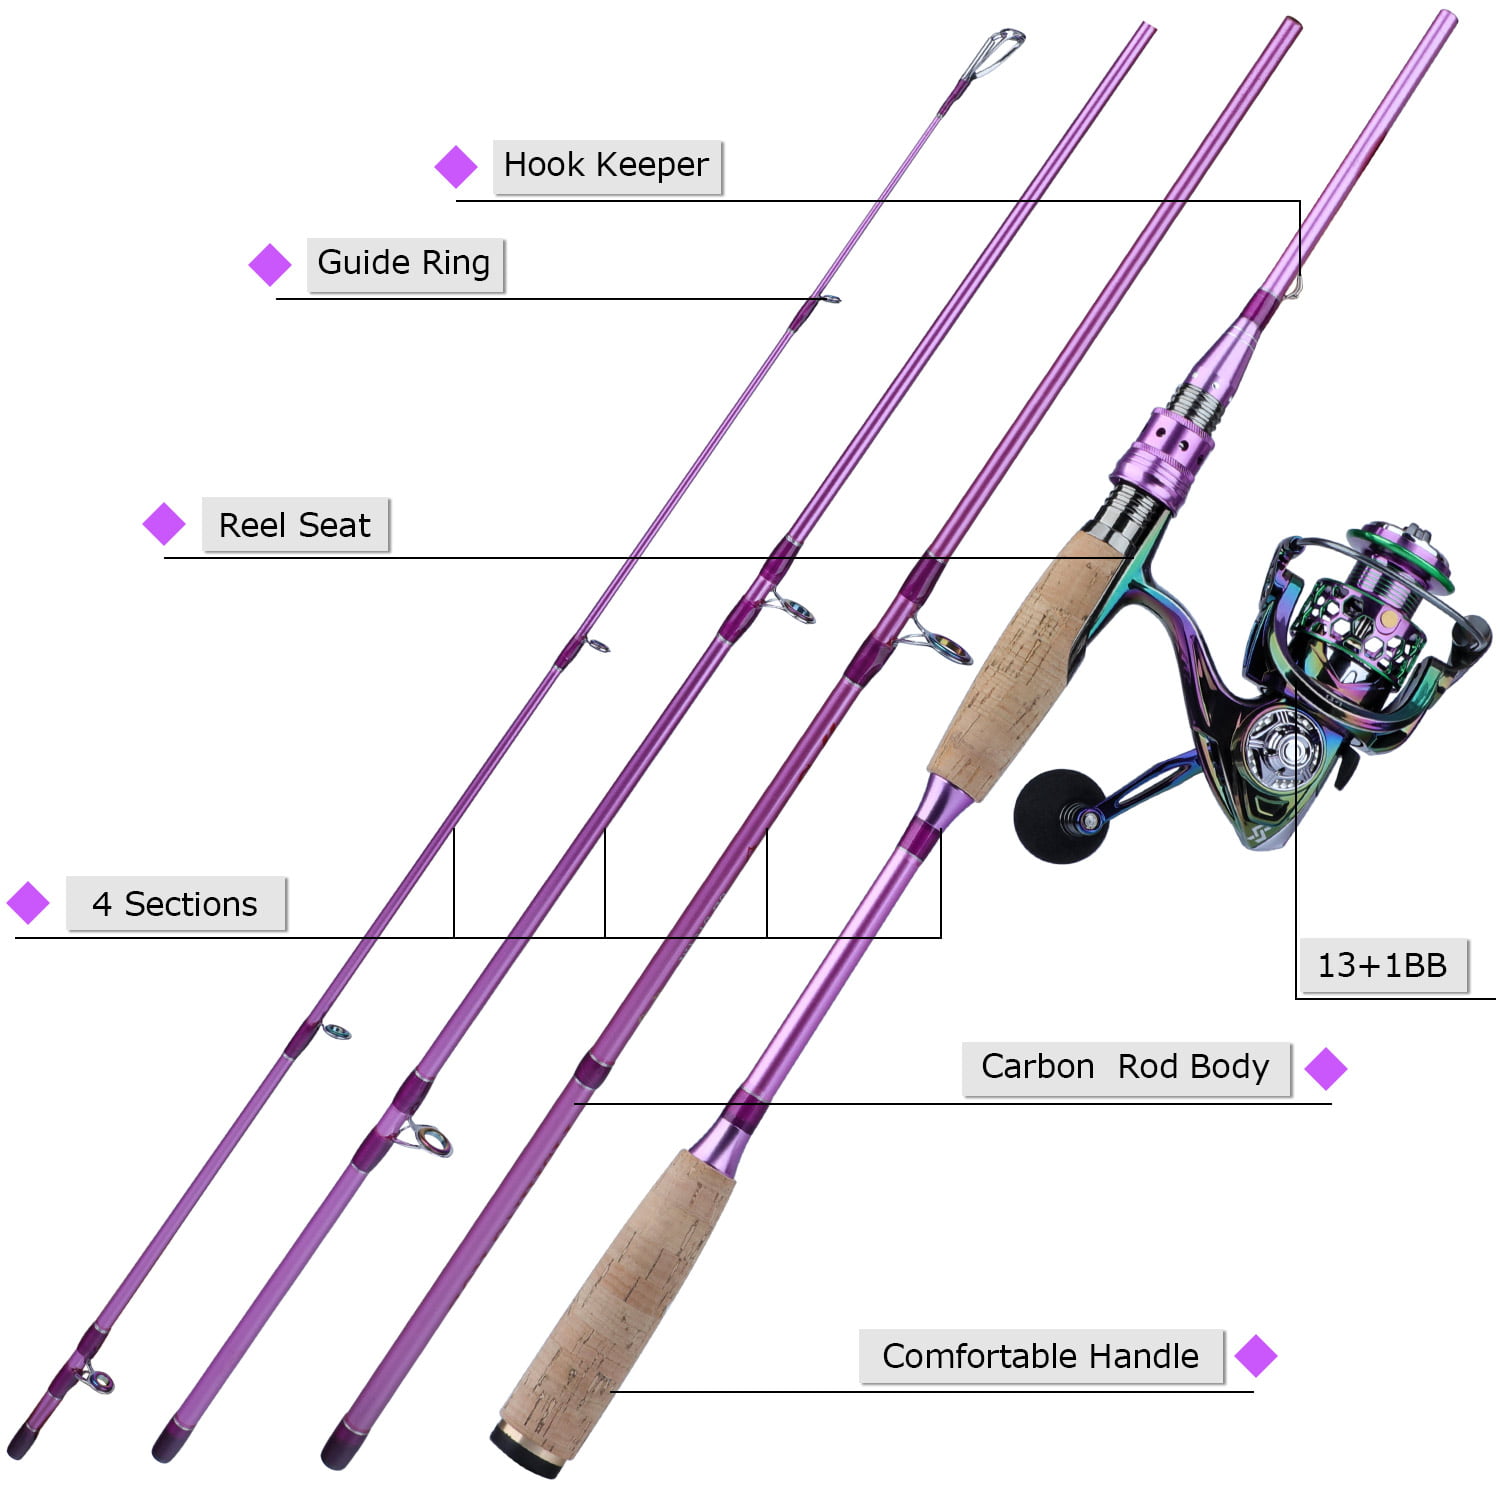 Sougayilang Spinning/Casting Fishing Rod and Reel Combo Carbon Fiber  Protable 4 Piece Fishing Pole Set 